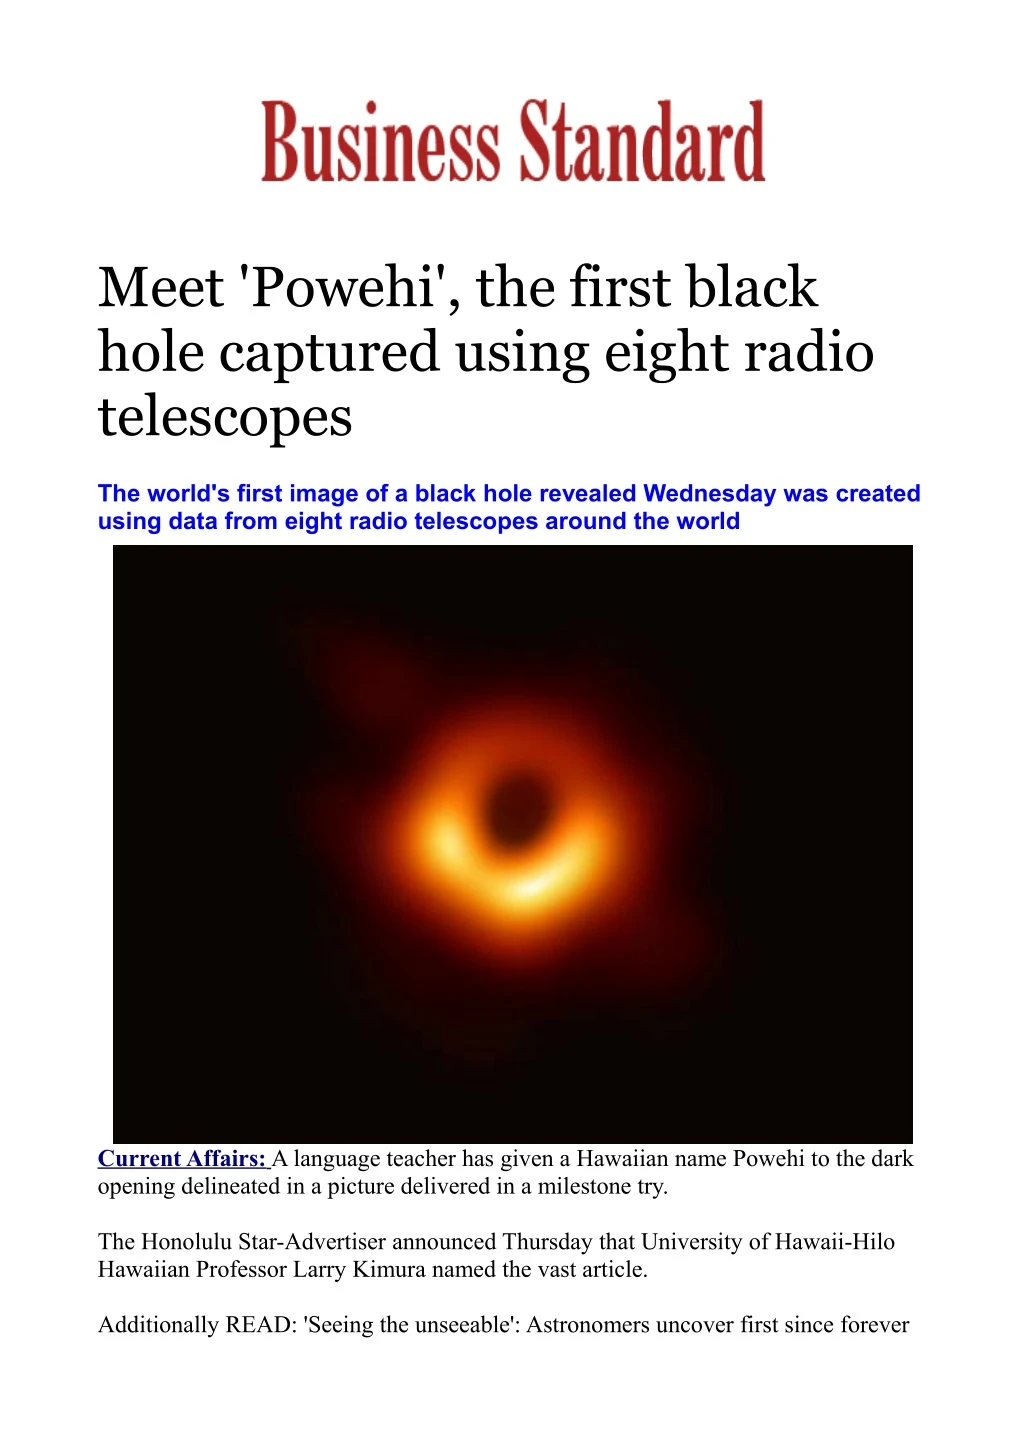 meet powehi the first black hole captured using